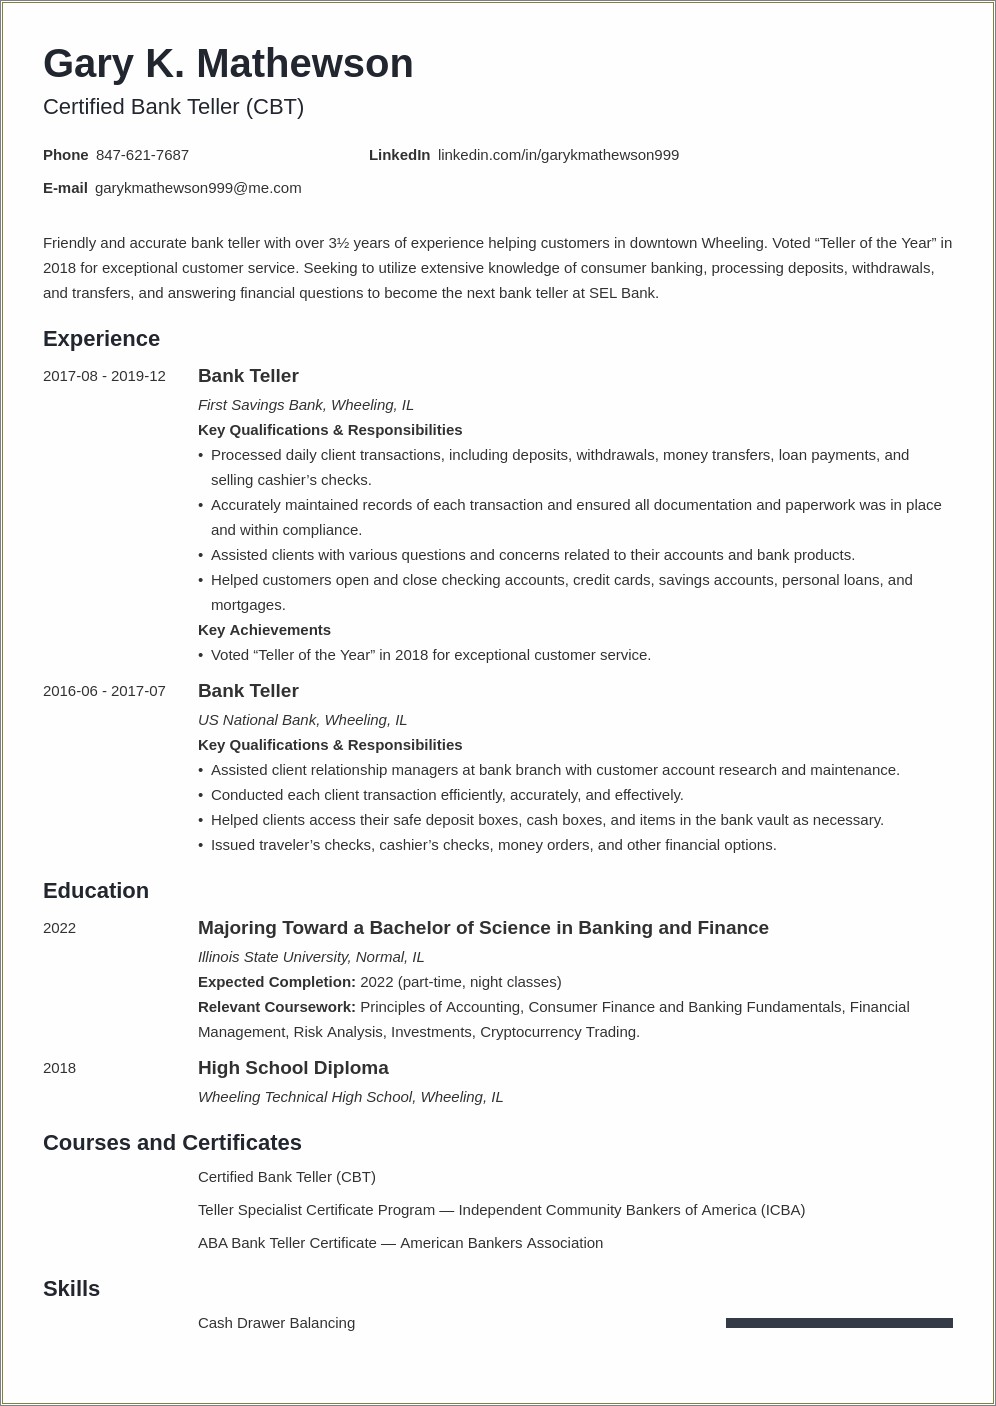 Resume For A Bank Teller With Experience